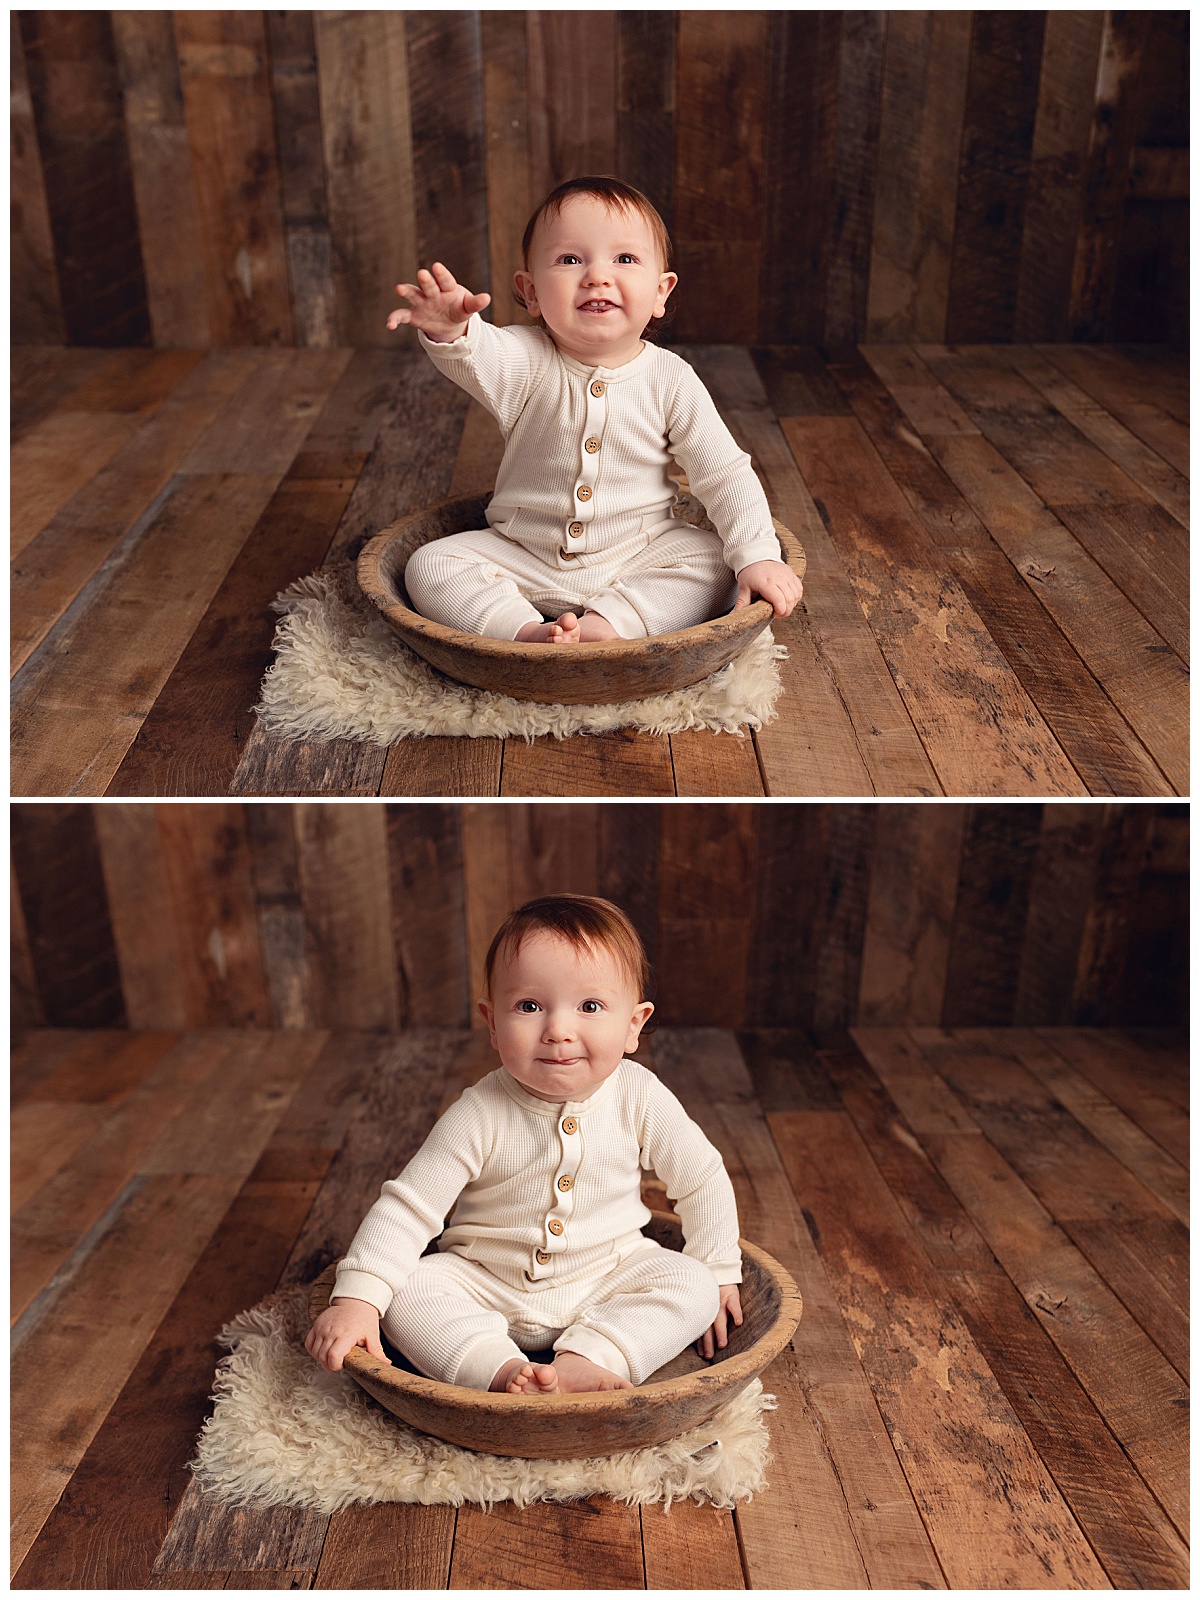 baby boy sits in wooden bowl reaching out by Amy Yang Photography